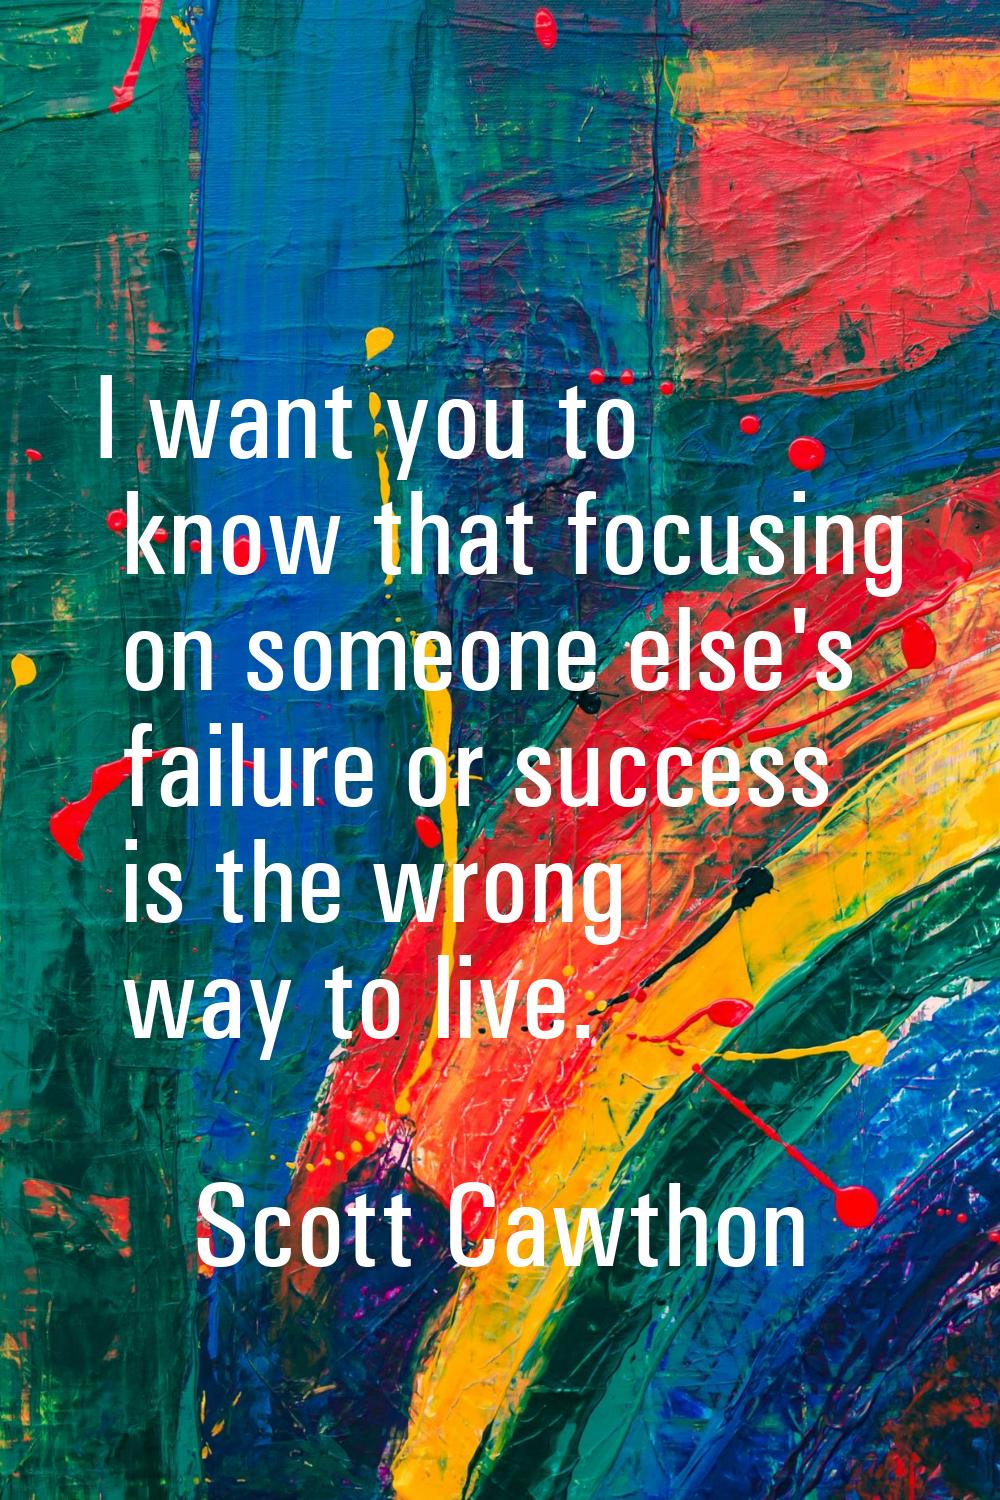 I want you to know that focusing on someone else's failure or success is the wrong way to live.